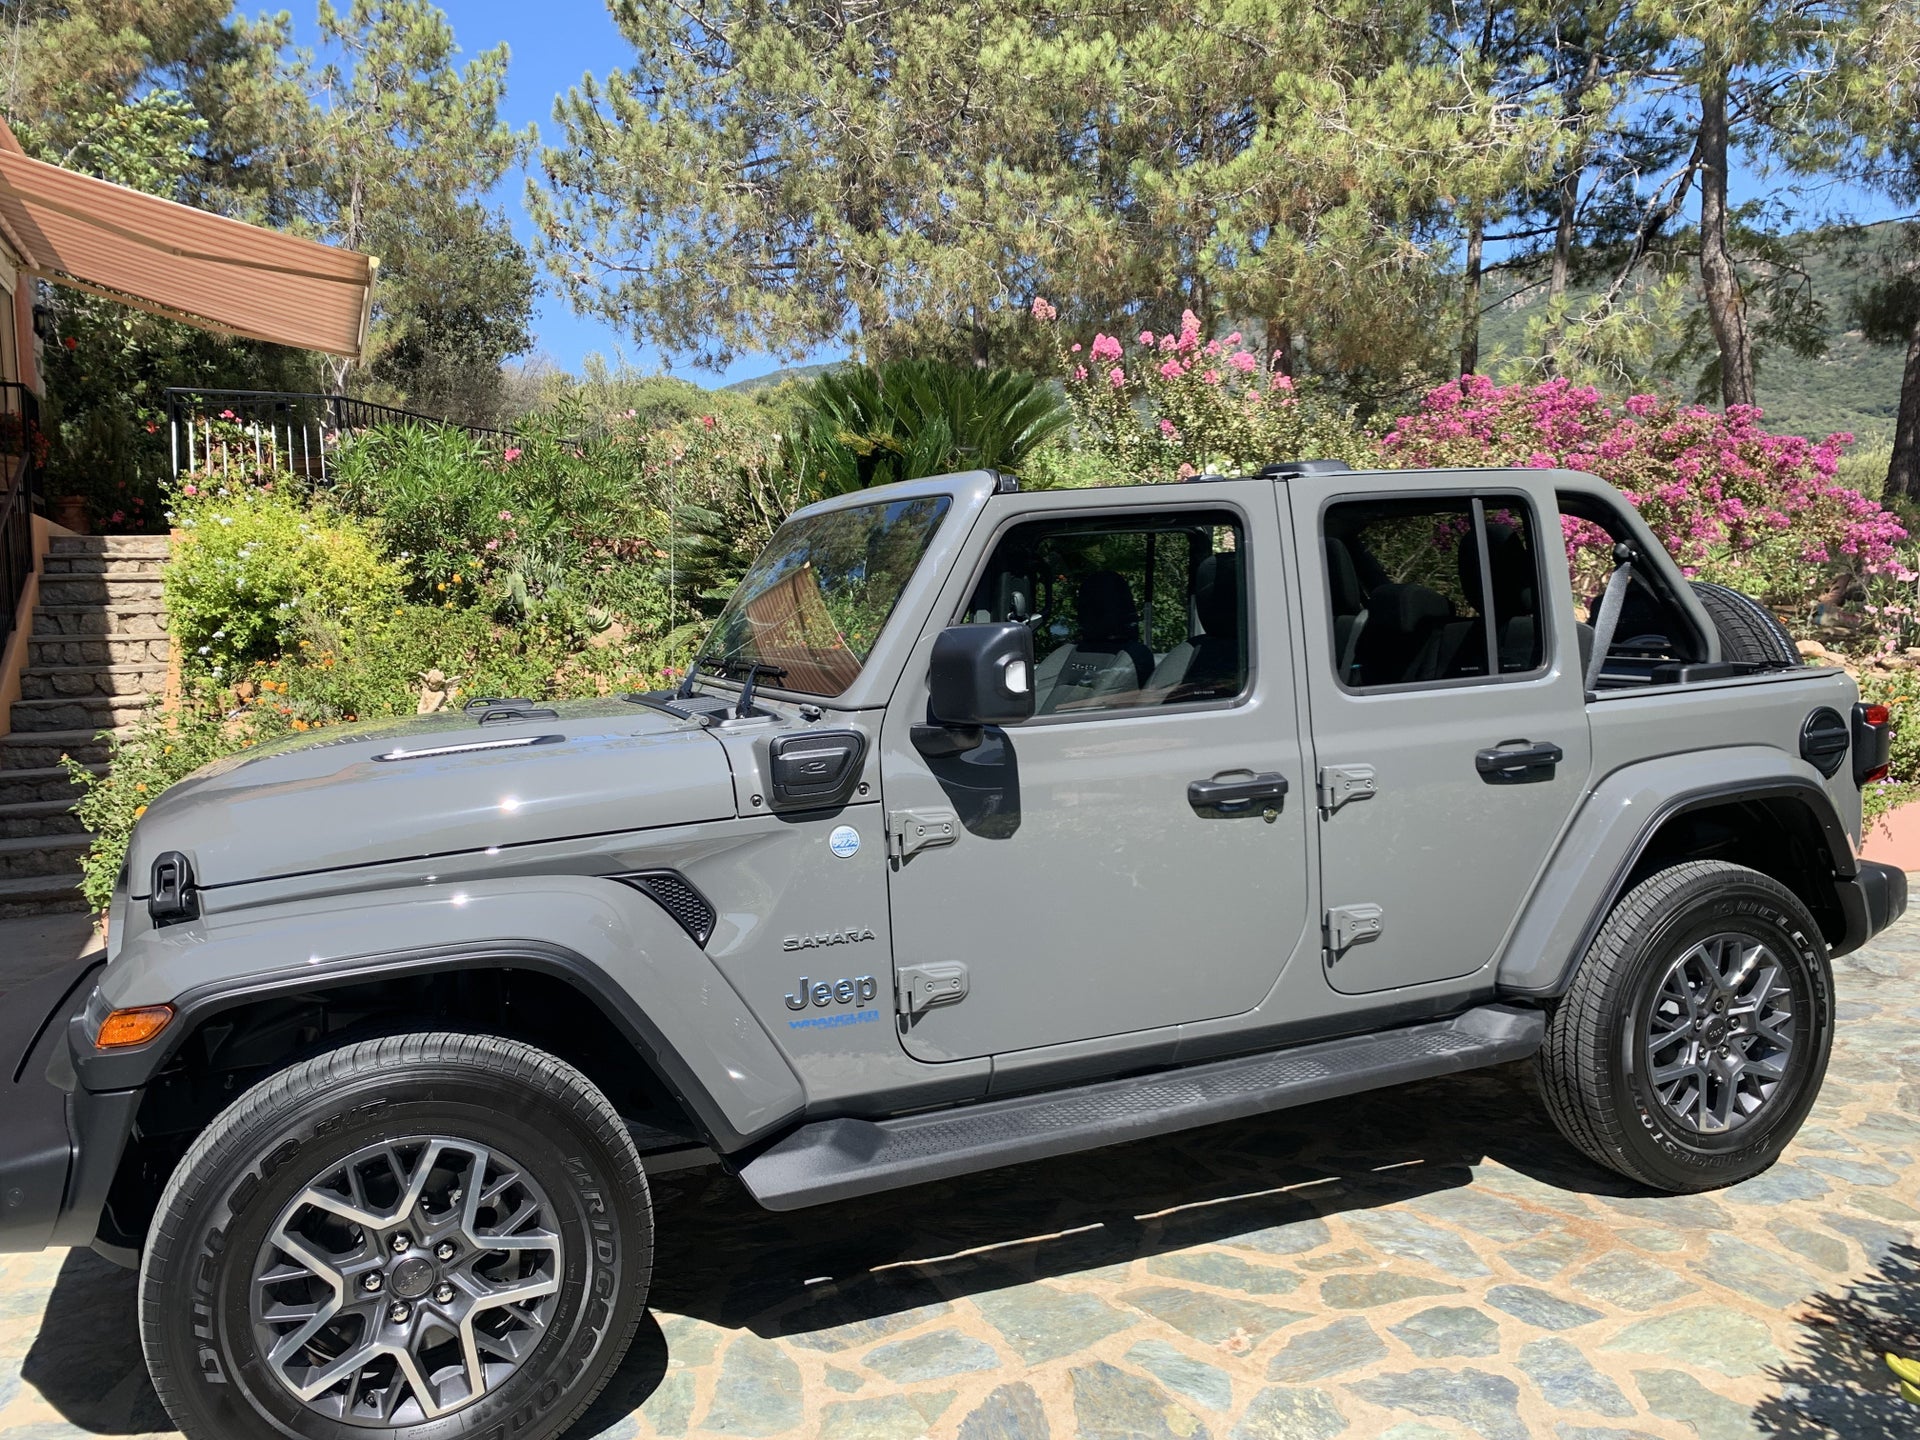 Sting Gray Jeep Wrangler 4xe Owners Picture Thread | Page 2 | Jeep Wrangler  4xe Forum